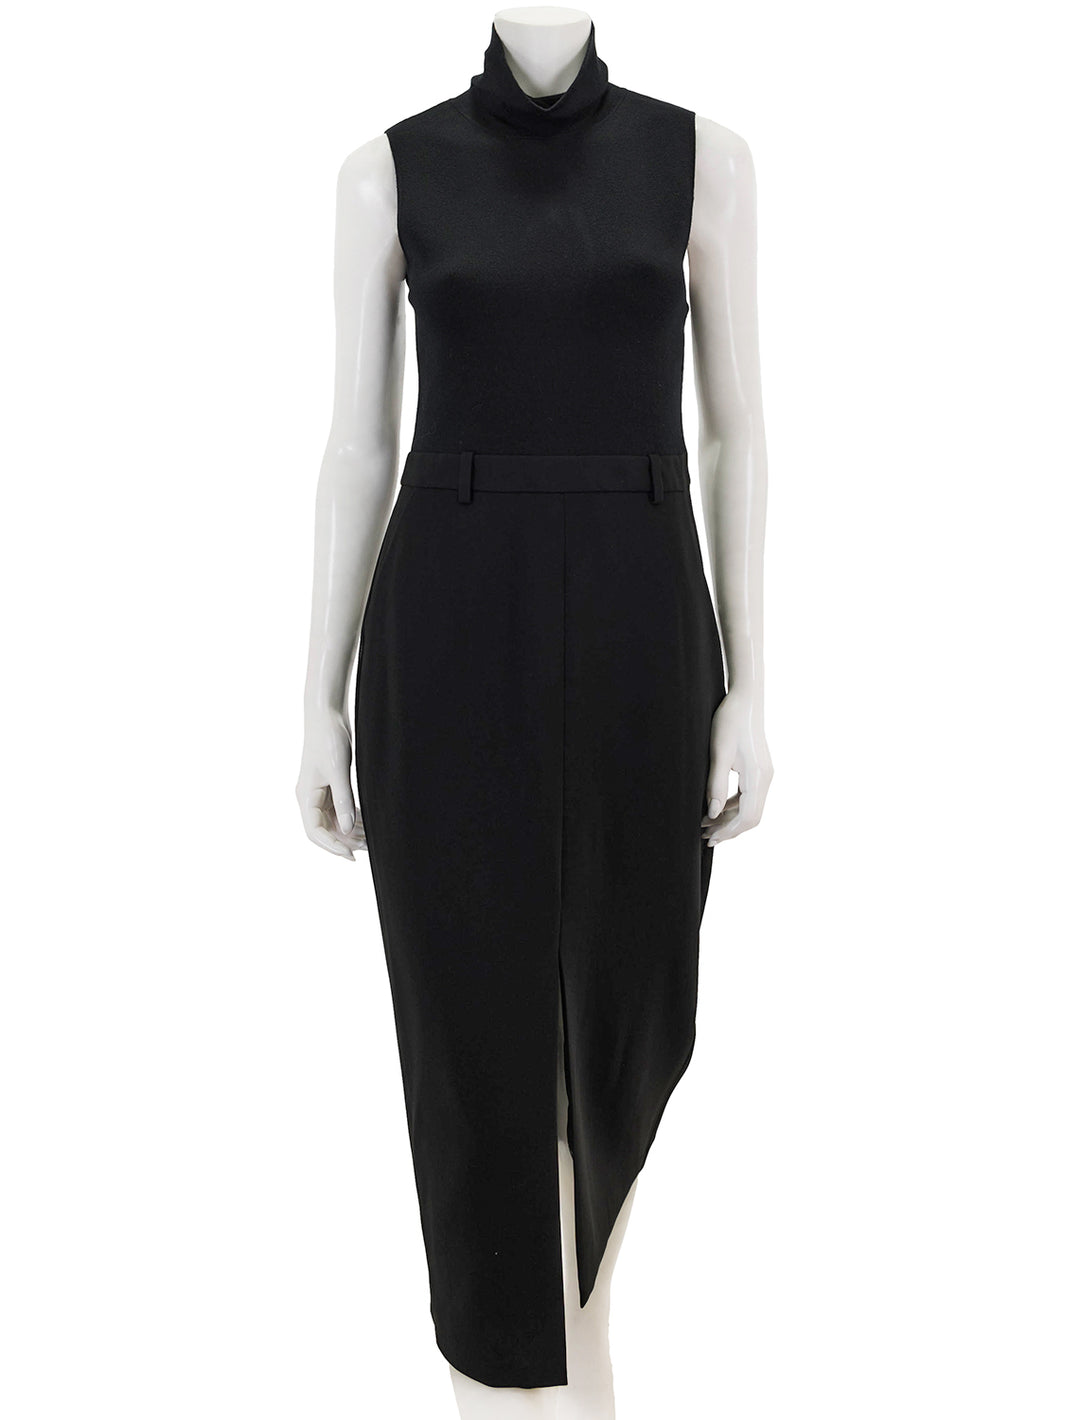 Front view of Theory's funnel neck dress in black.